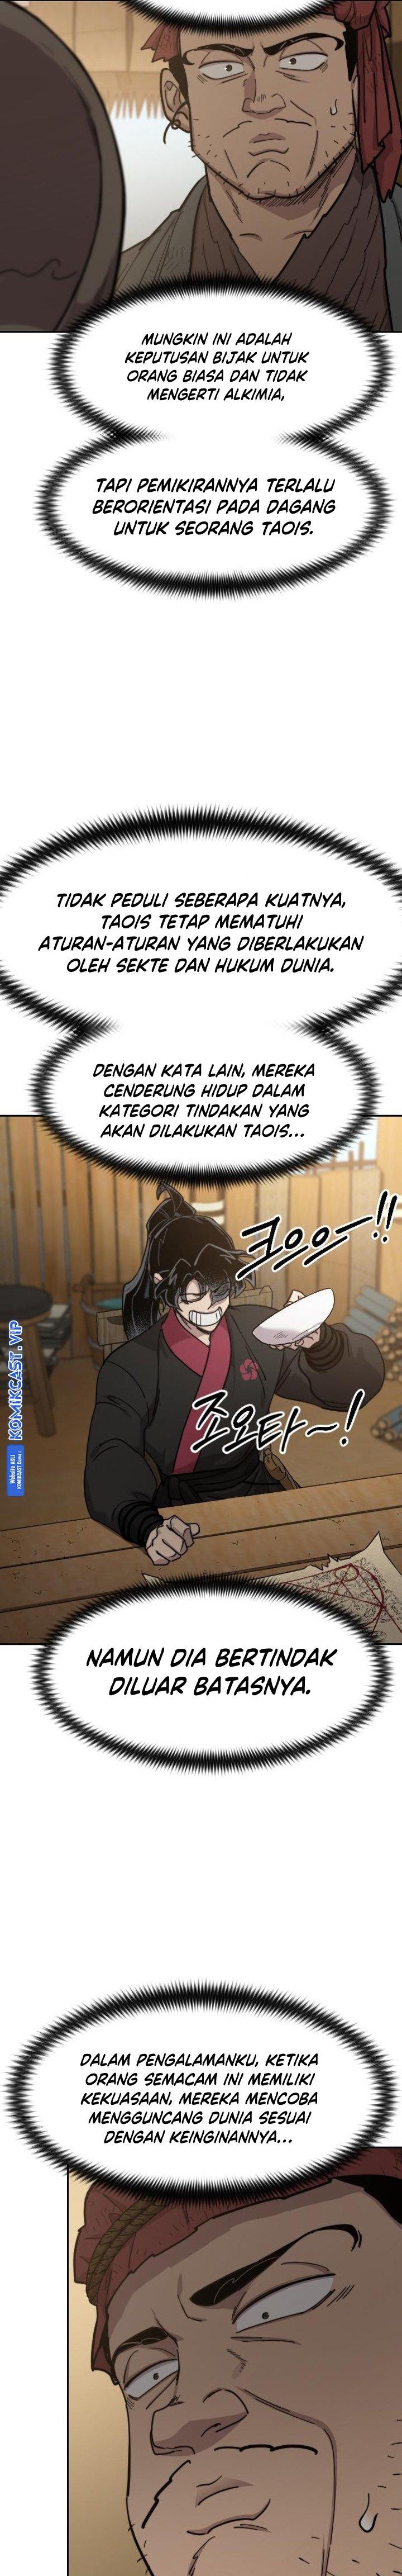 Return of the Flowery Mountain Sect Chapter 87